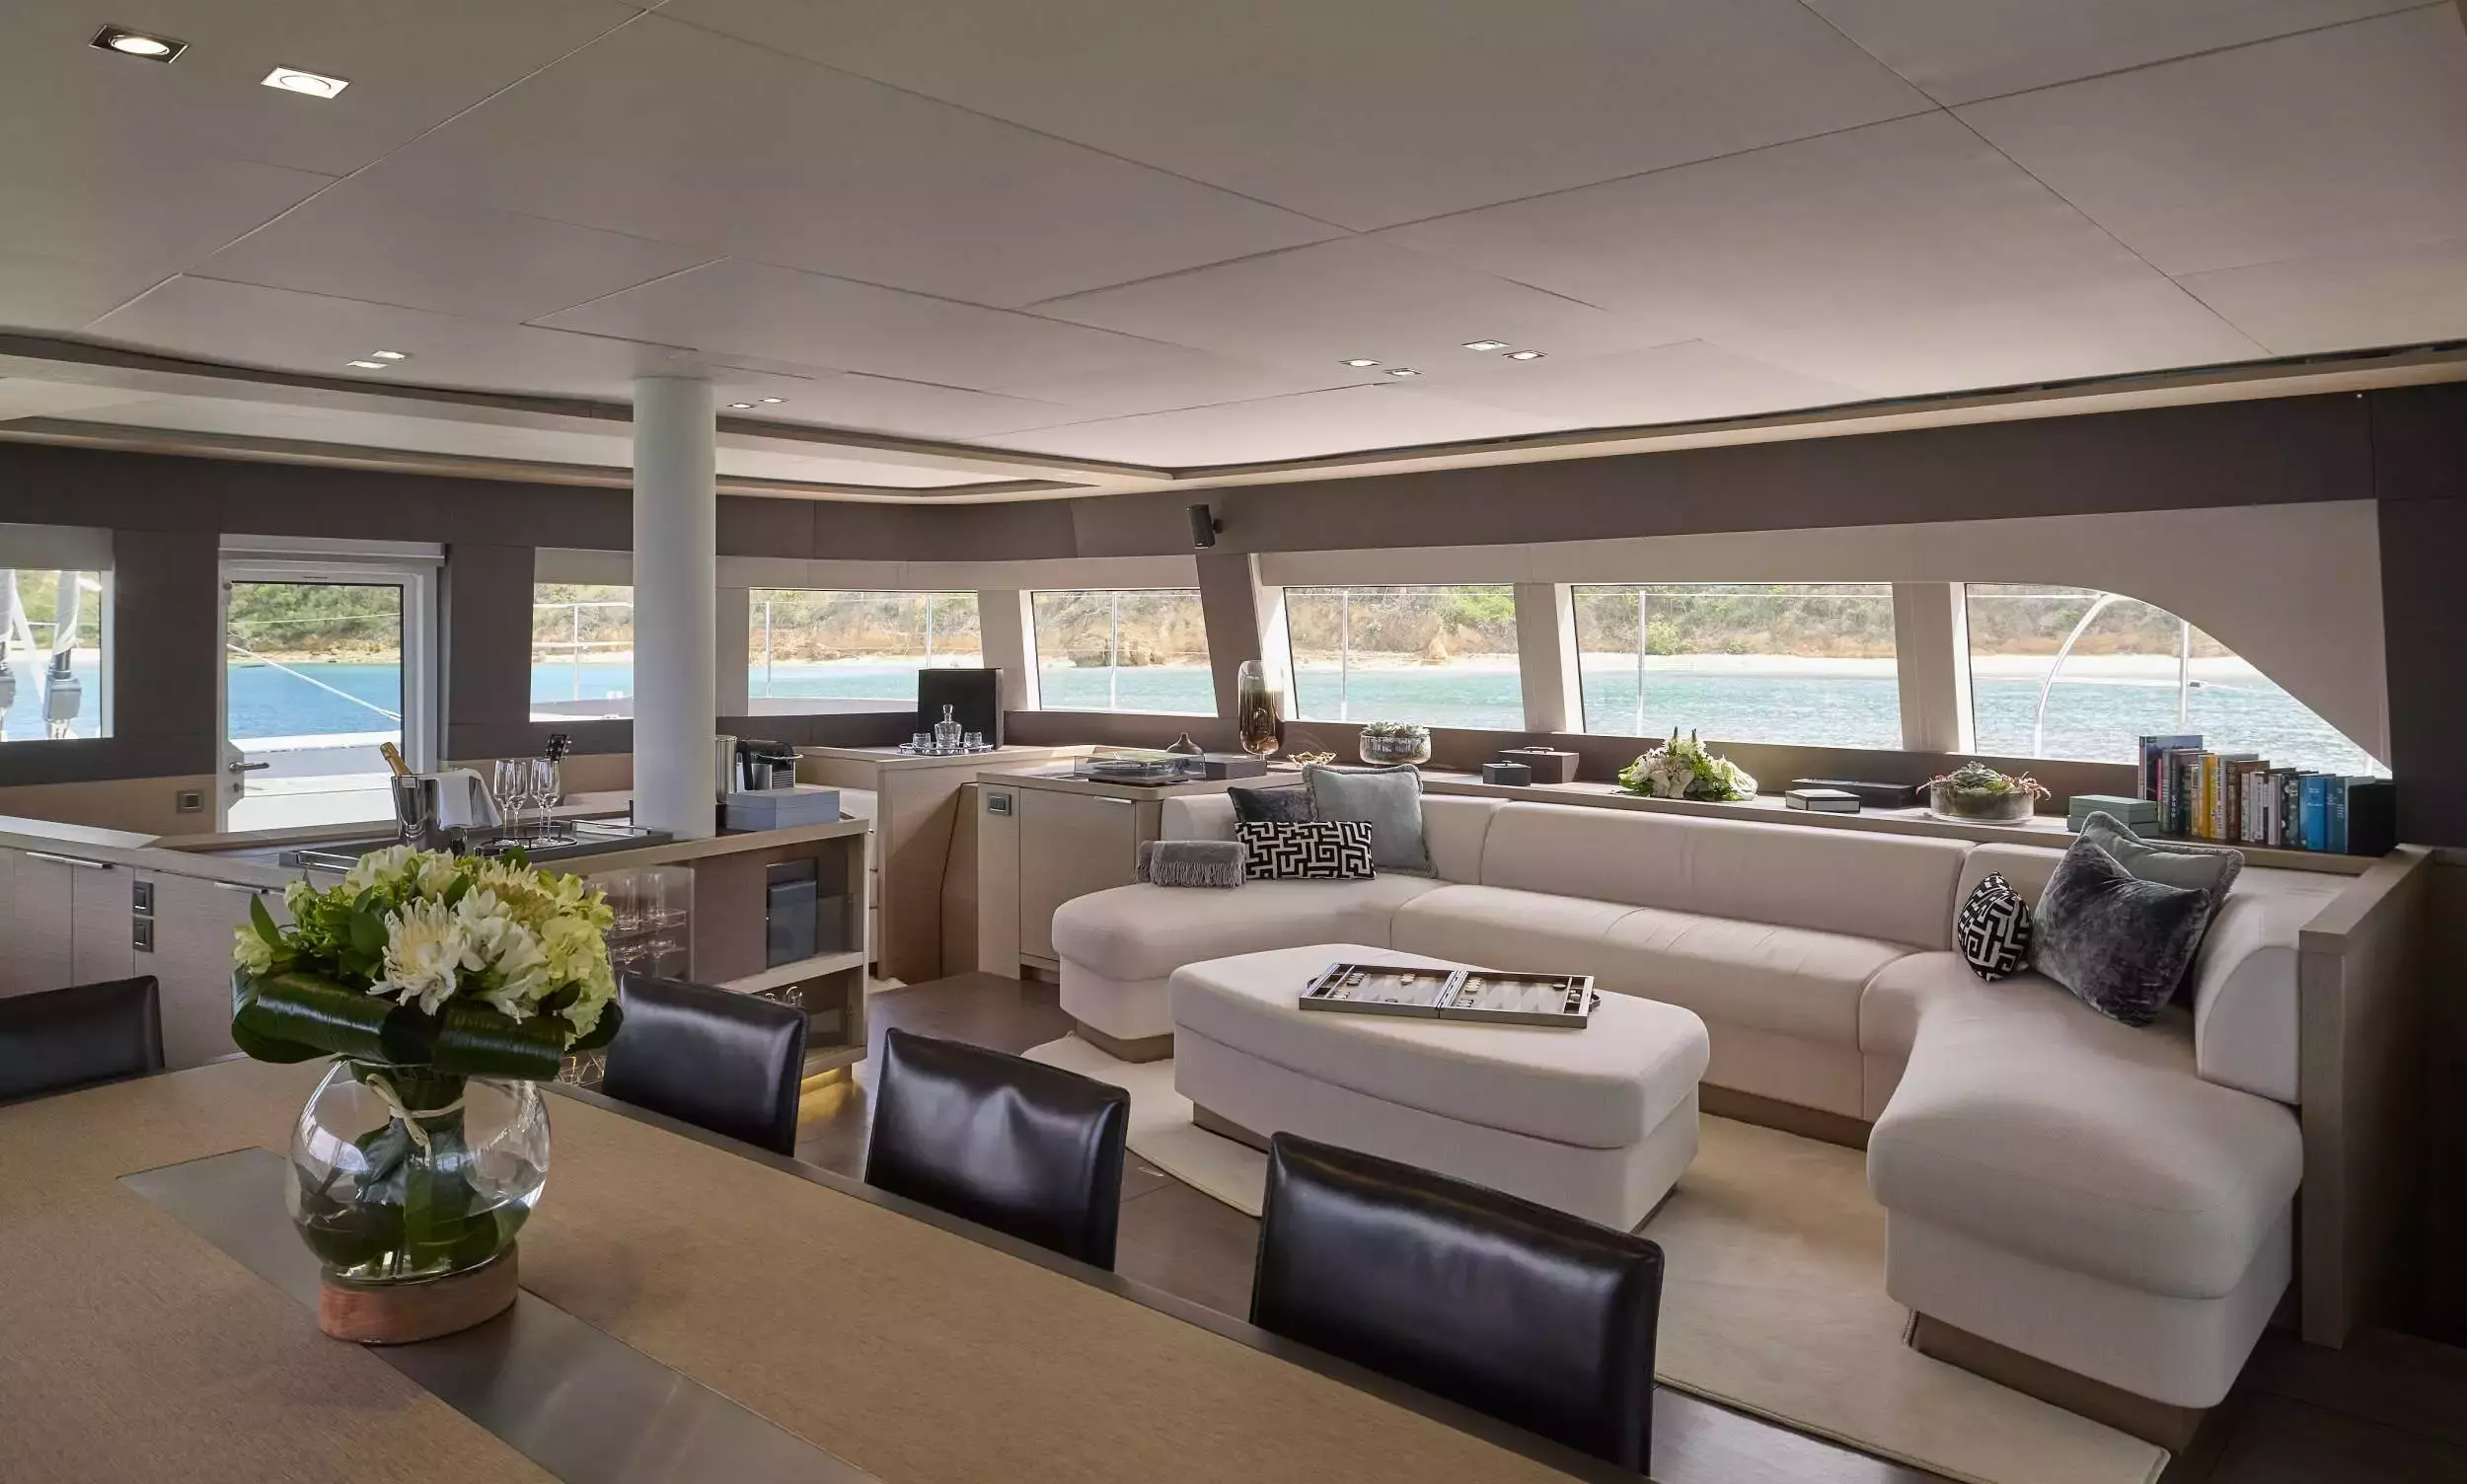 La Gatta by CNB Bordeaux - Special Offer for a private Luxury Catamaran Charter in Tortola with a crew